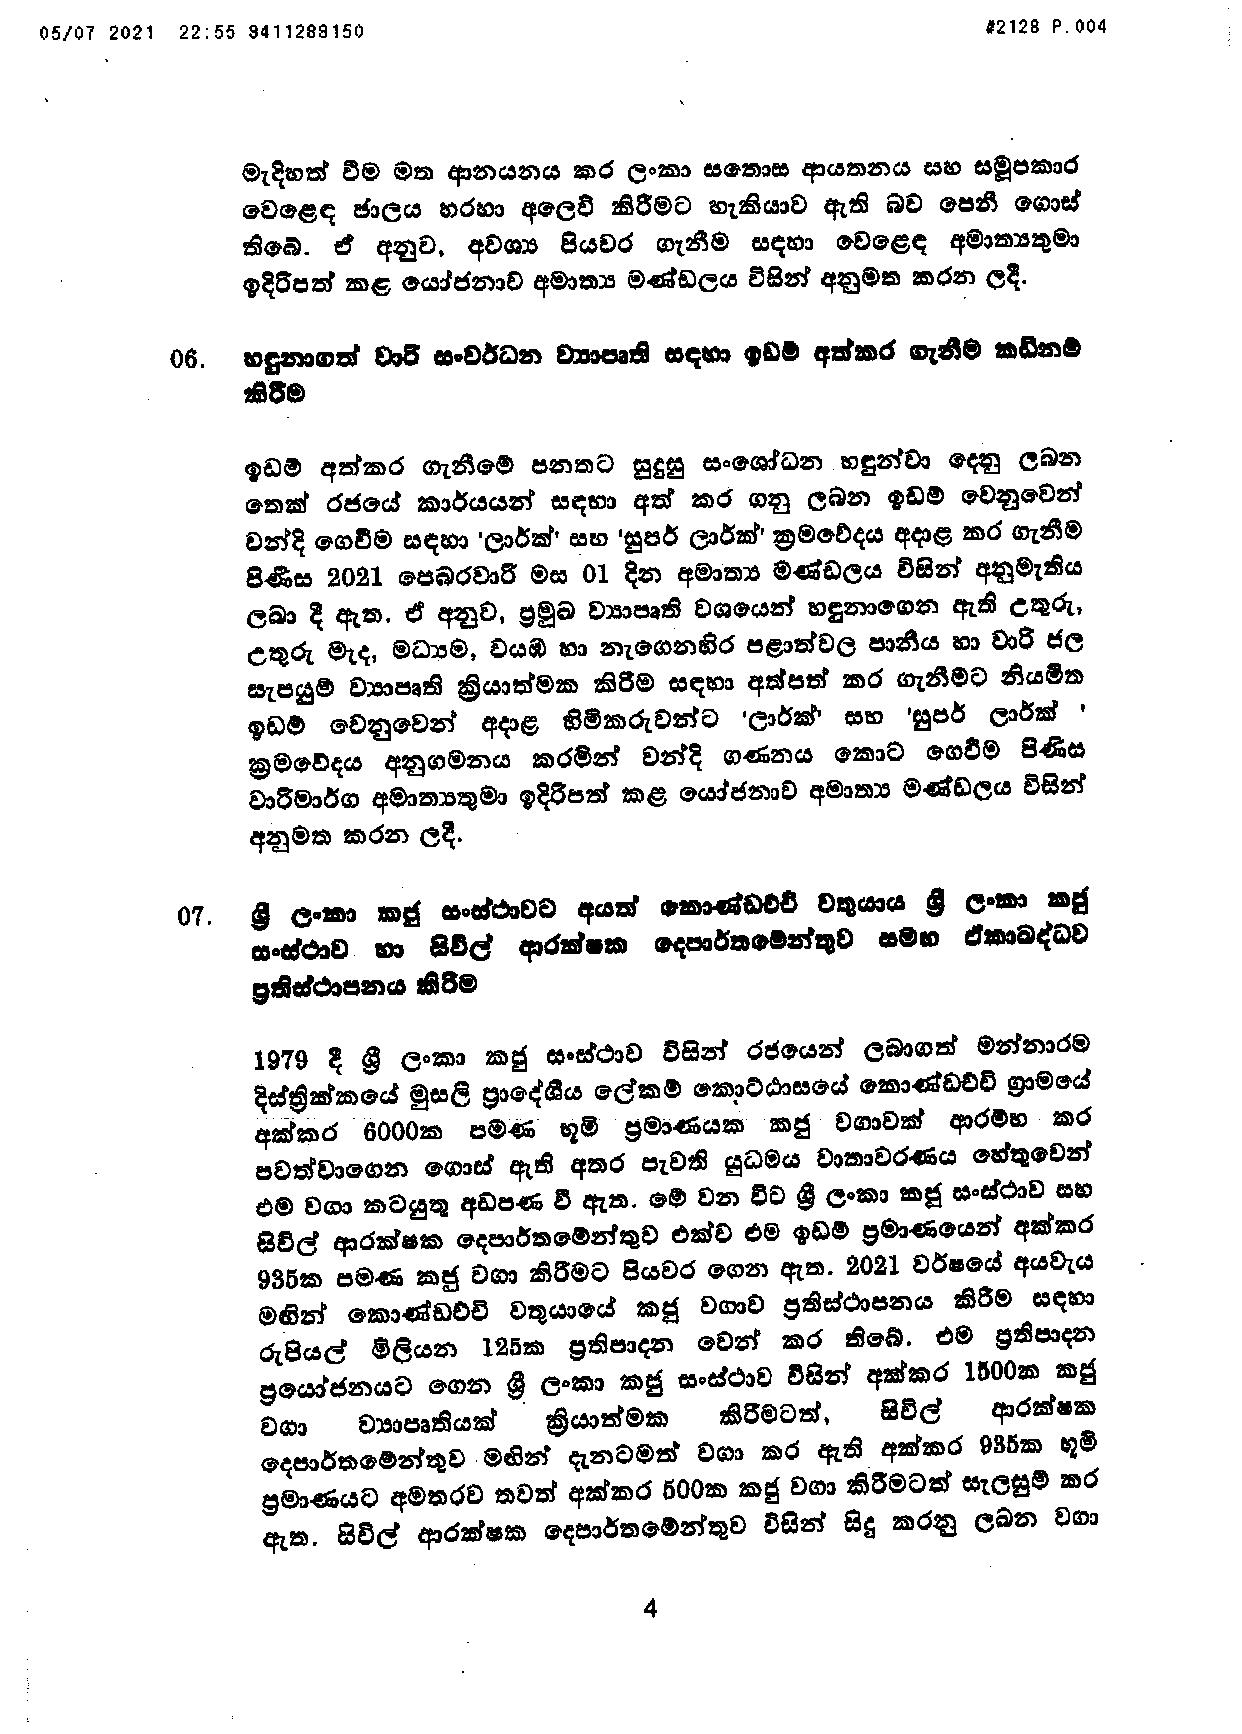 Cabinet Decision on 05.07.2021 page 004